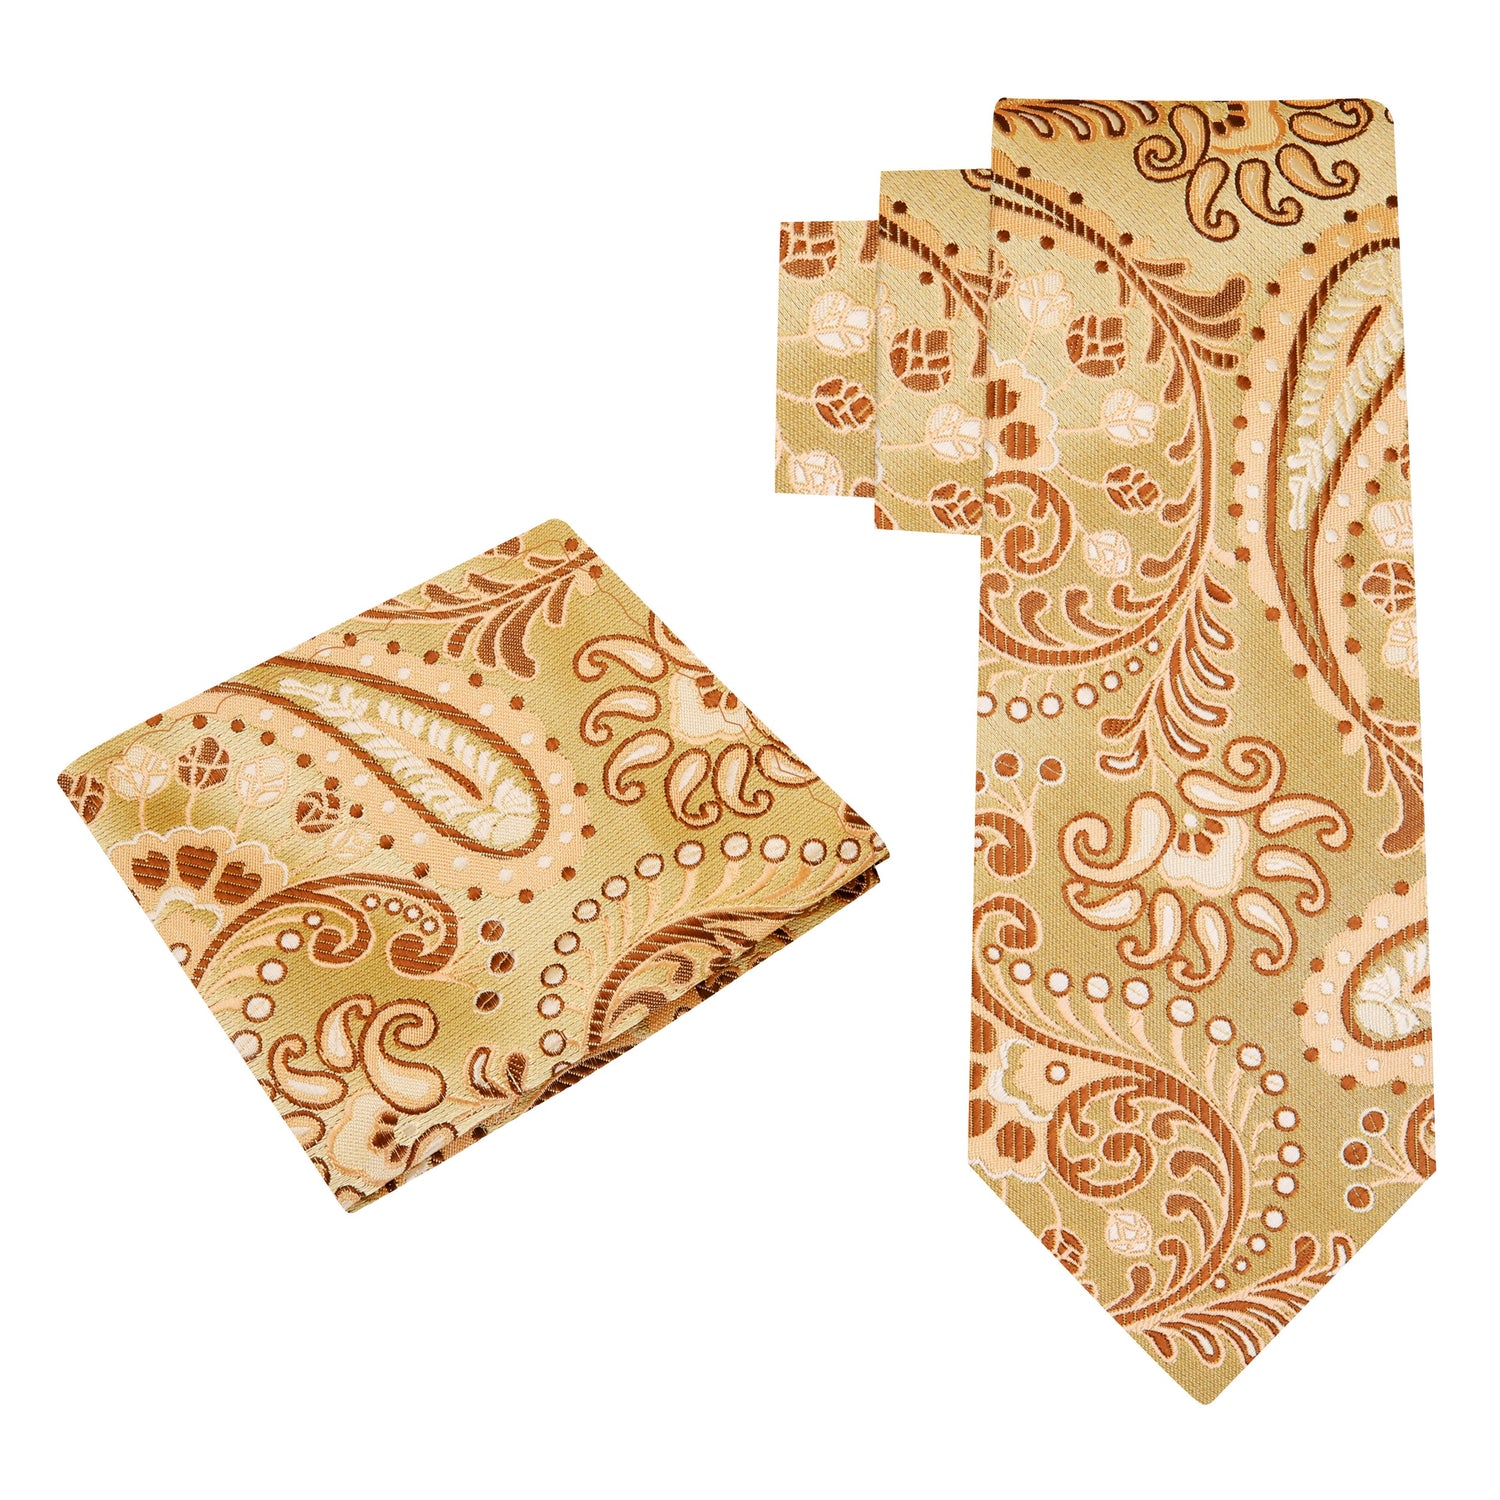 Alt View: A Gold, Brown Paisley Pattern Silk Necktie, Matching Pocket Square